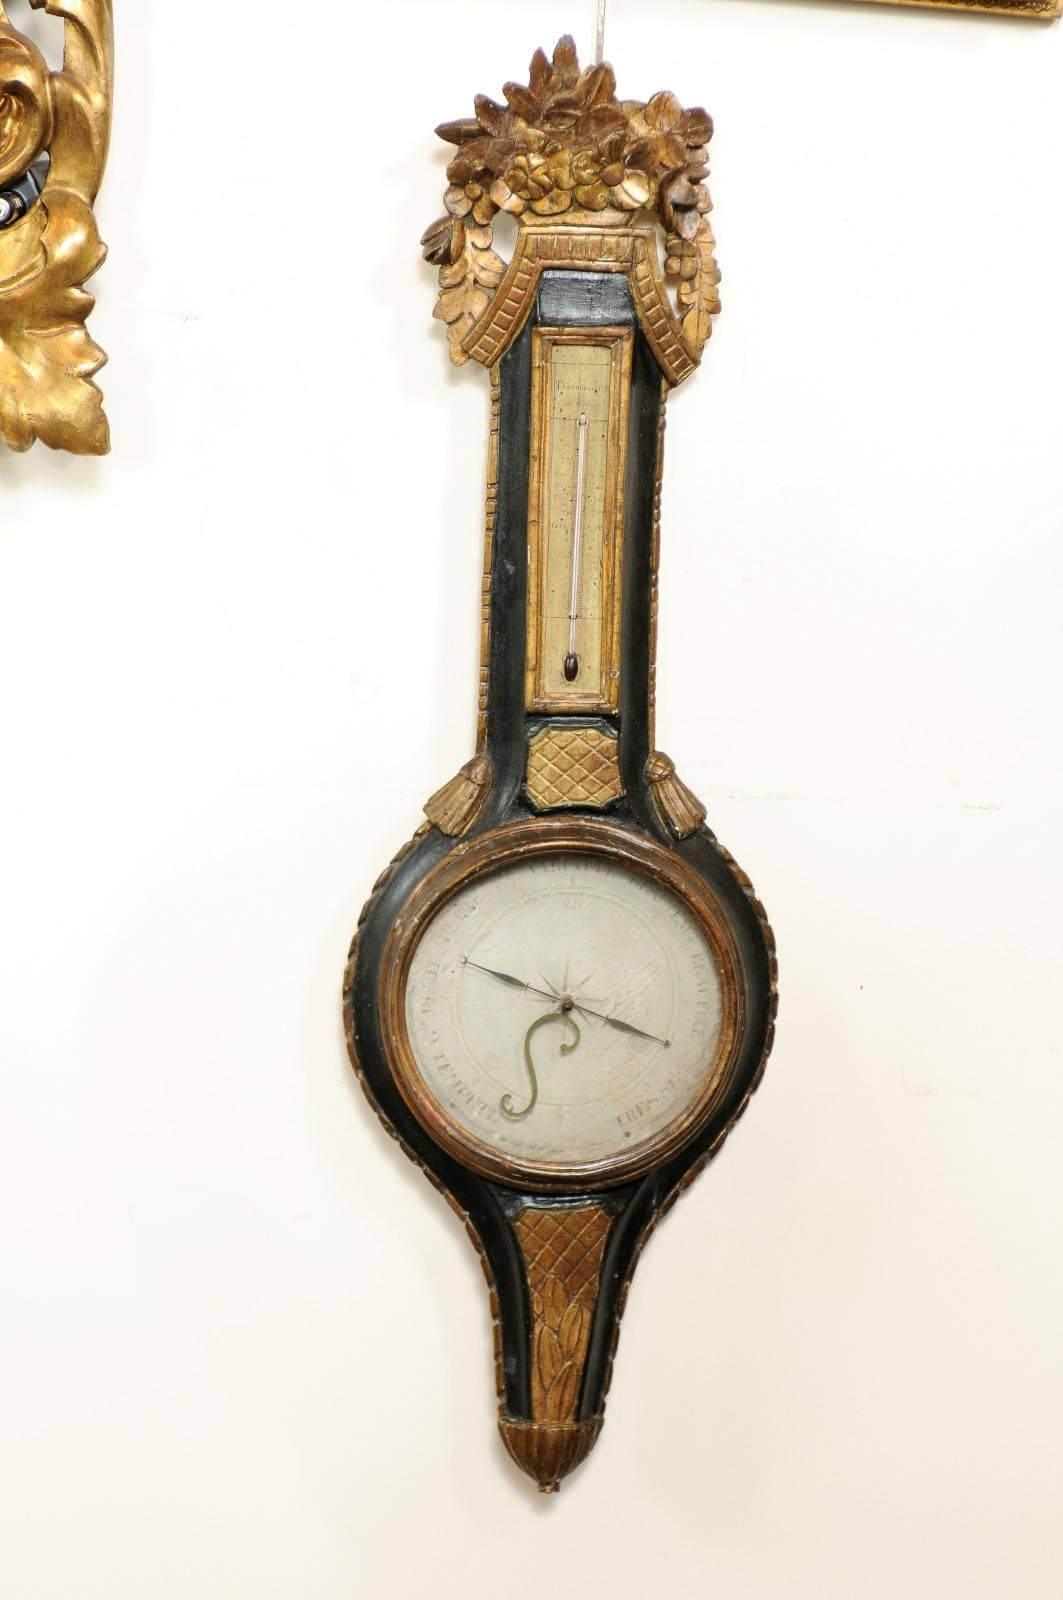 This French Louis XVI style barometer and thermometer features an exquisite carved giltwood crest with delicate foliage motifs. Below the crest, the thermometer, encompassed in a black painted body, sits atop the round barometer. This French